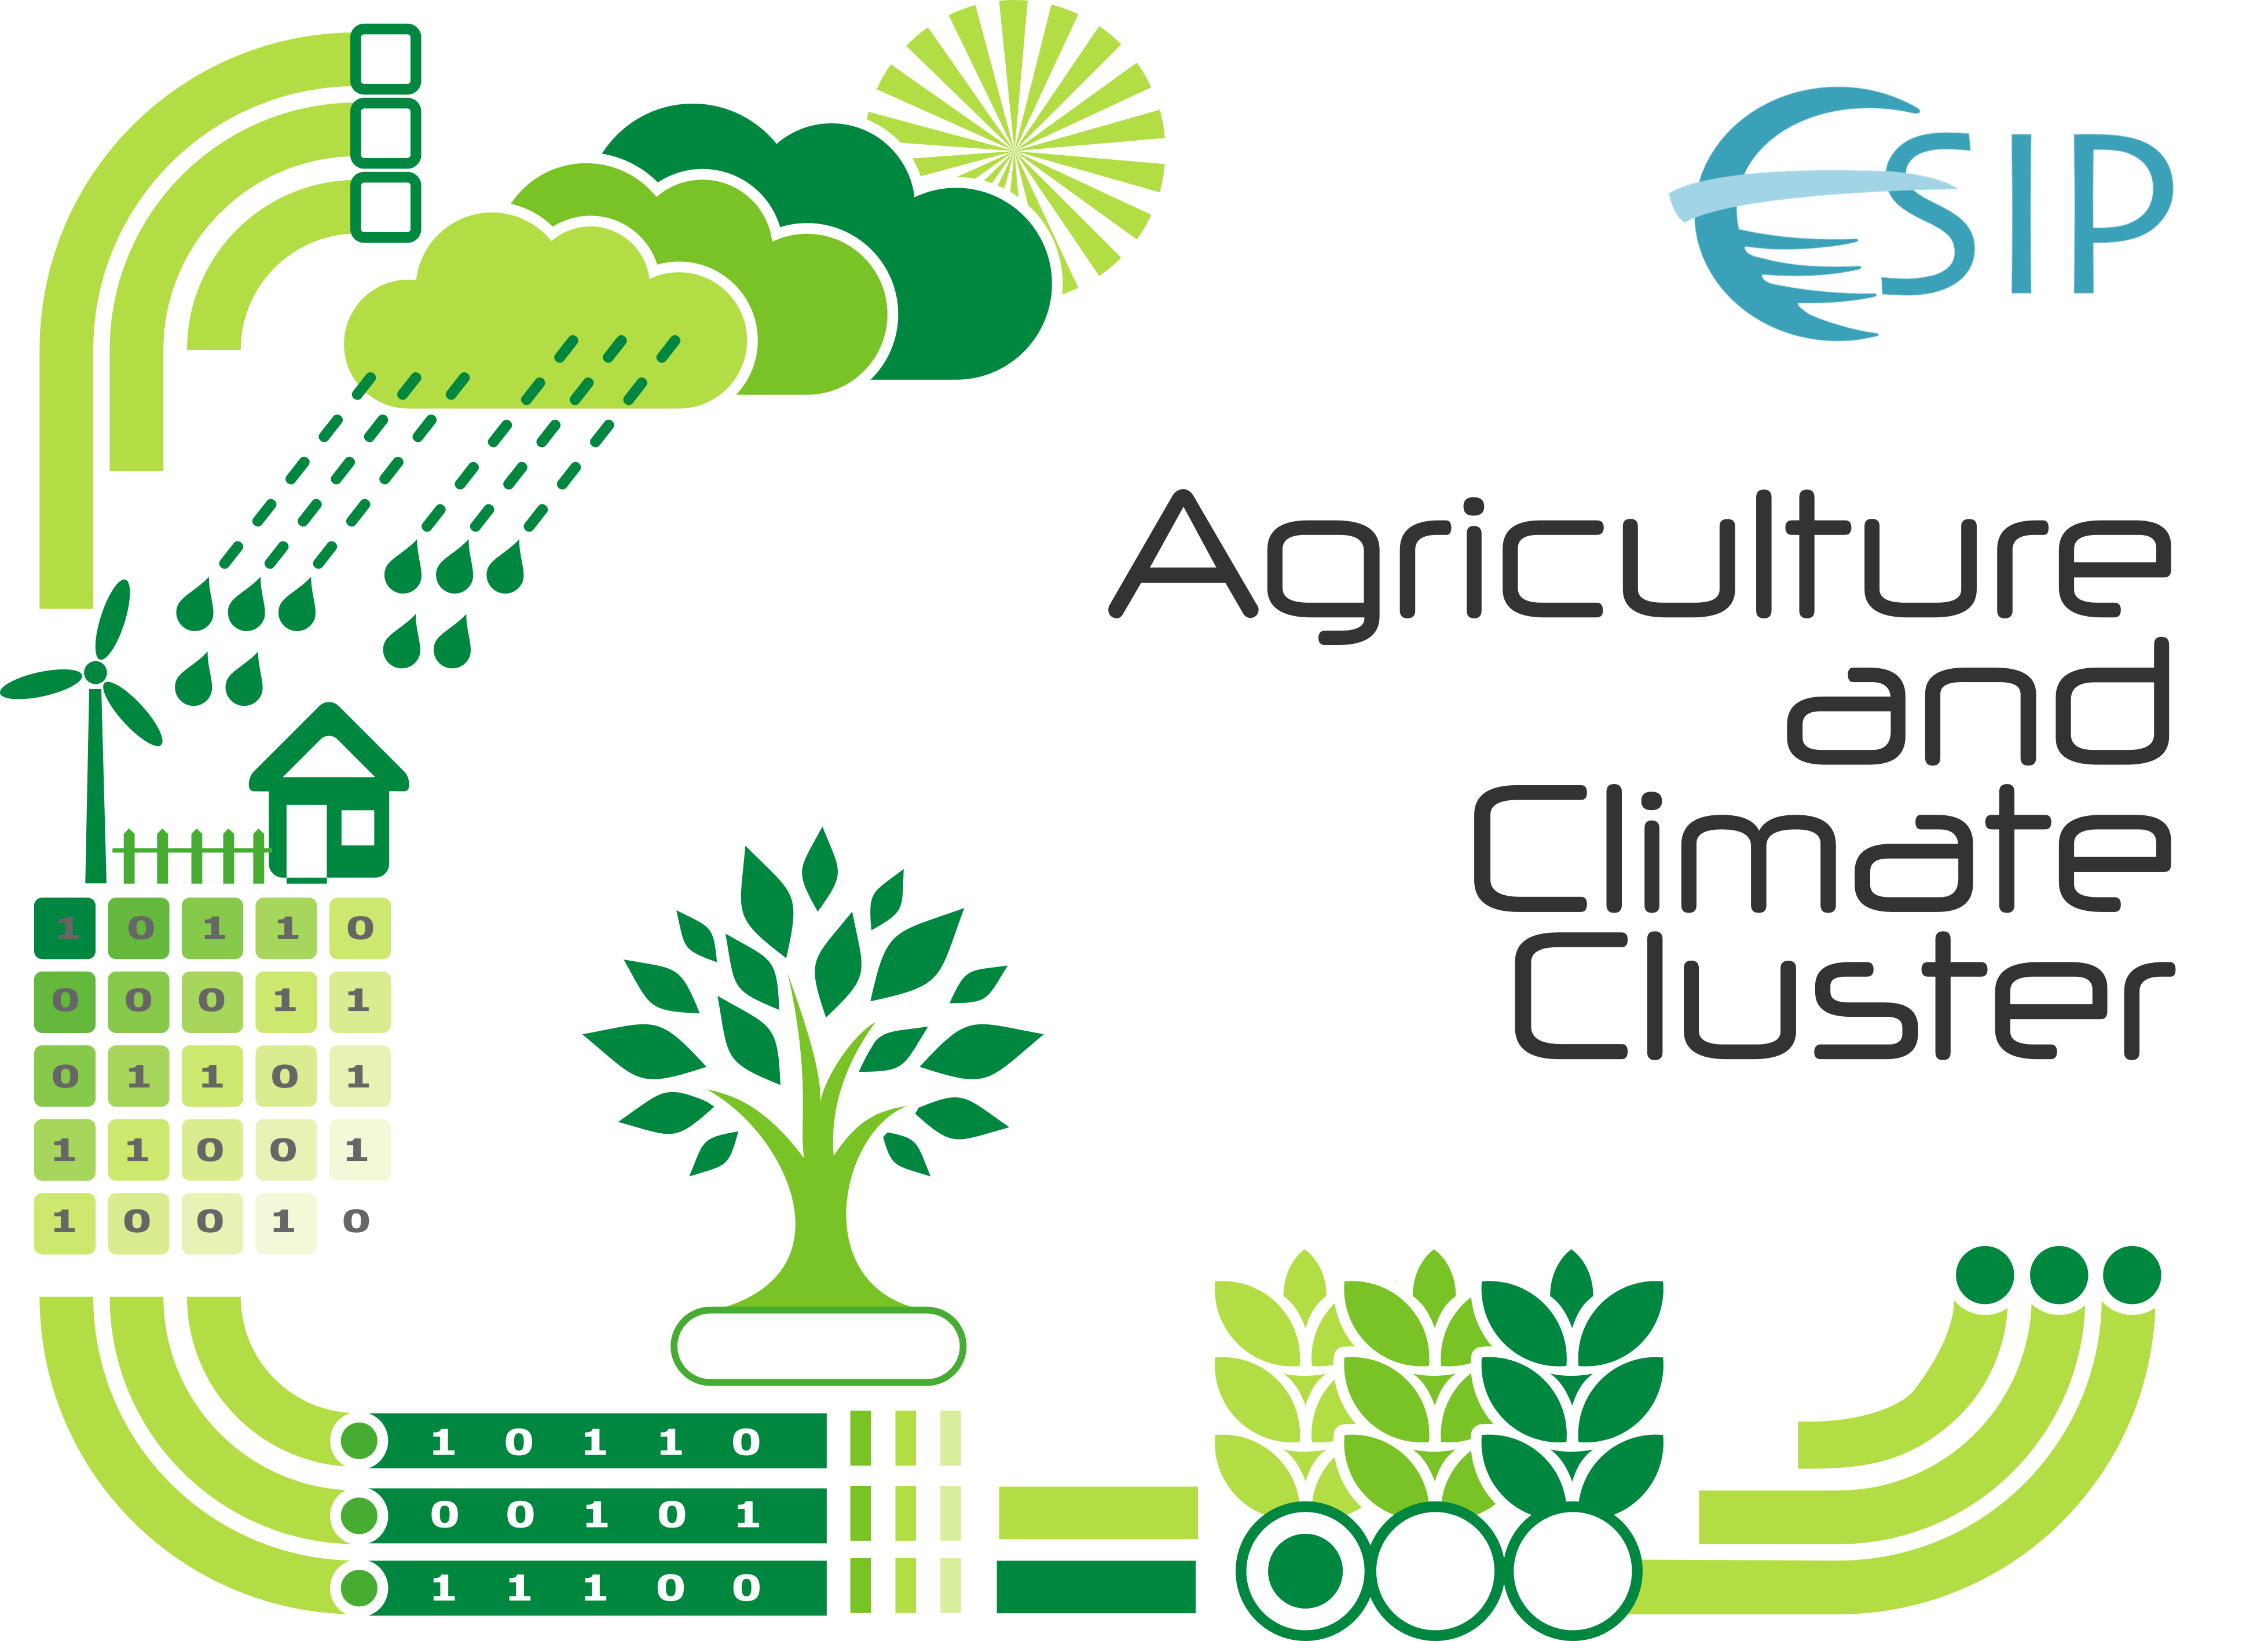 ESIP Agriculture and Climate Cluster logo.v1.2.png